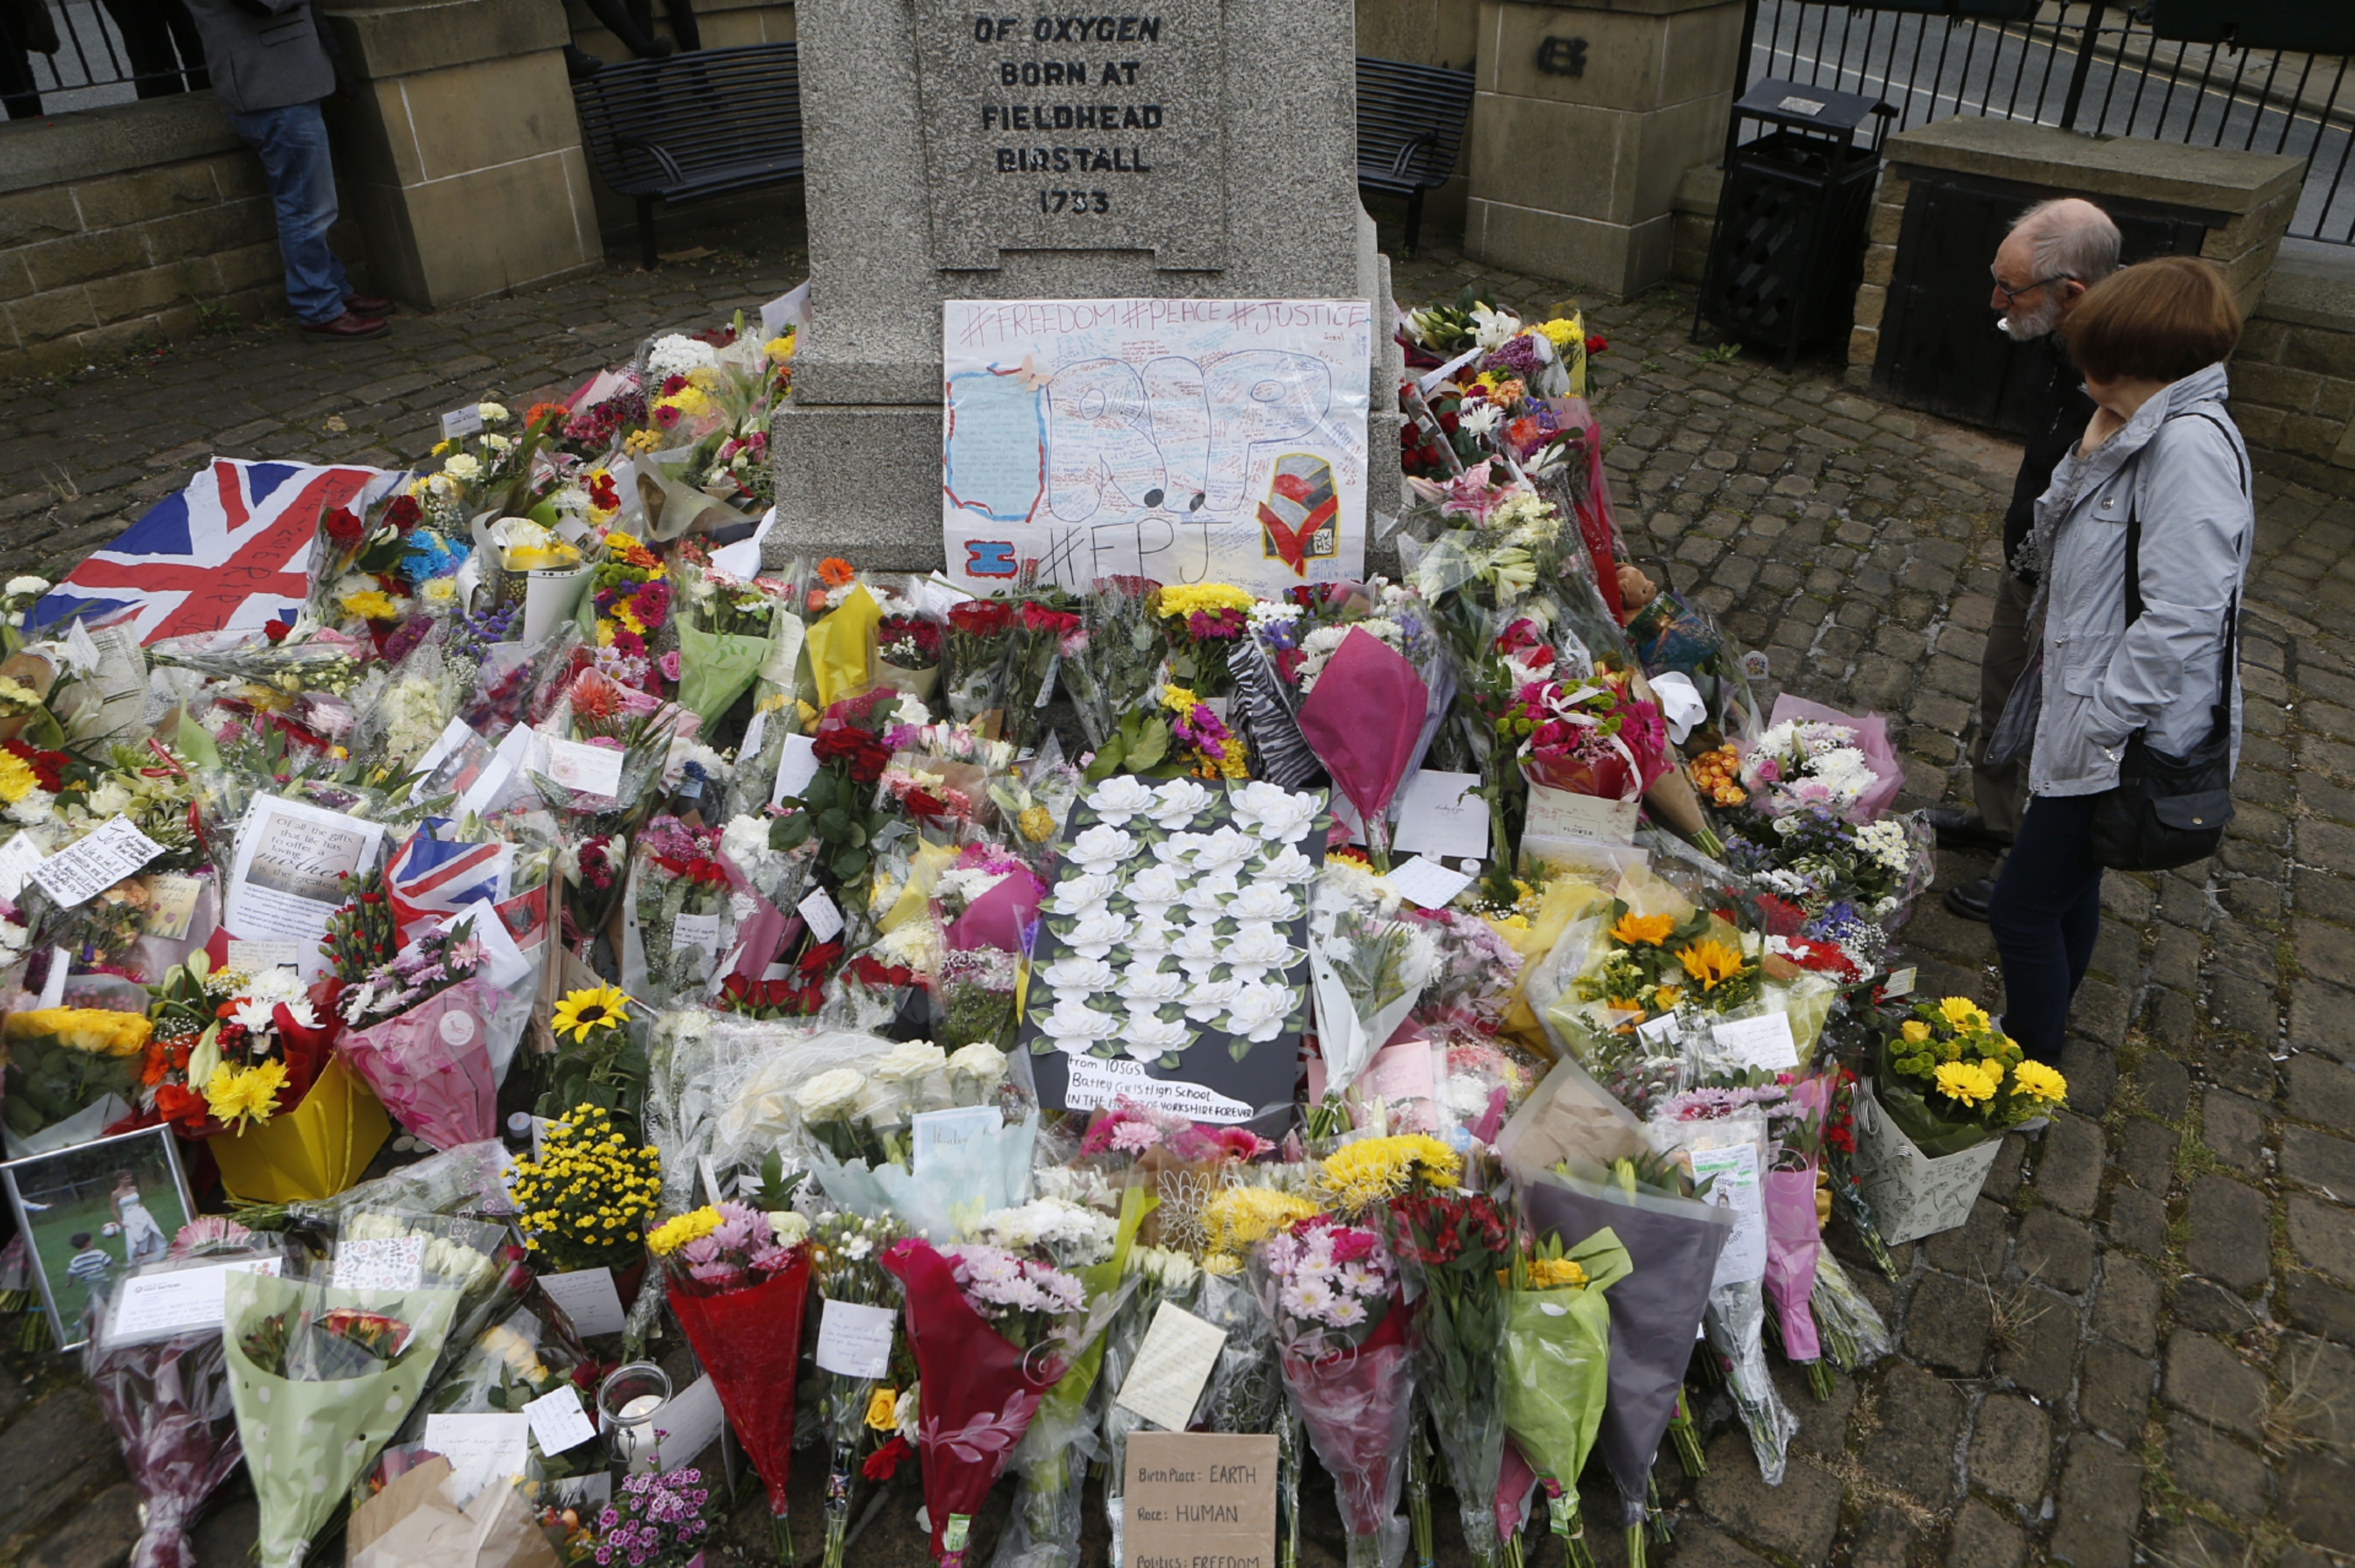 A sea of tributes is forming in Jo Cox's Yorkshire constituency, near where she was murdered.